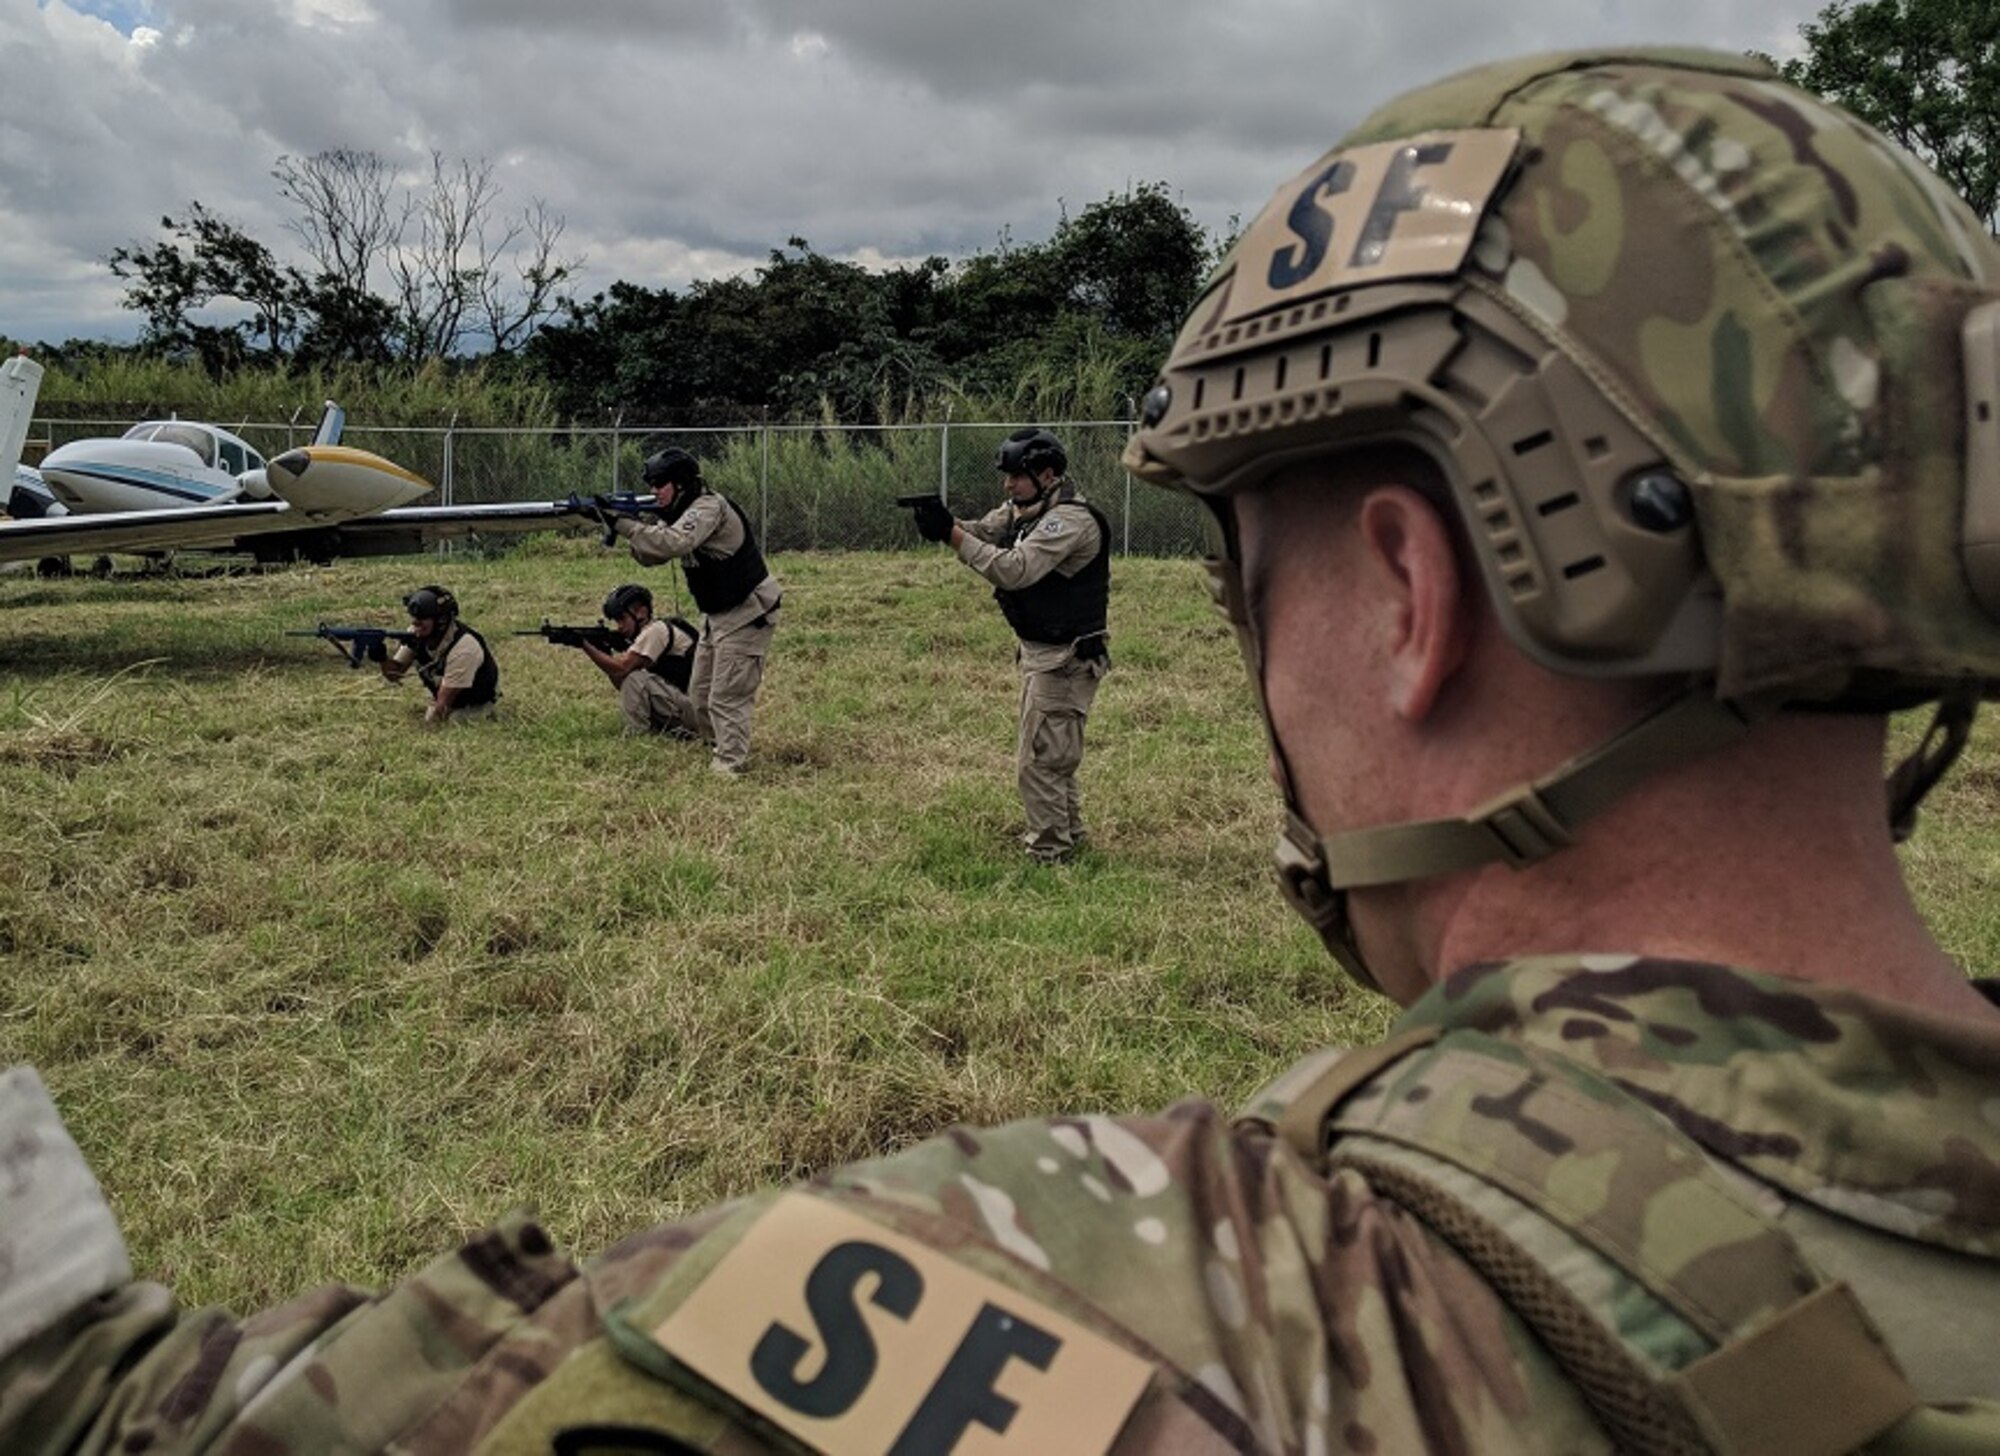 Tech. Sgt. Benjamin Wilson, 571st Mobility Support Advisory Squadron air advisor, assesses students in an air interdiction scenario, during a three-week building partnership capacity mission with the Costa Rican air vigilance service, May 16 through June 9, 2018. The mobility training team's mission was to train and advise the SVA in aircraft interdiction, aircraft maintenance, base defense and dog handling as they continue to counter illicit drug trafficking throughout the region. (U.S. Air Force photo by Capt. LaDarian Outsey)